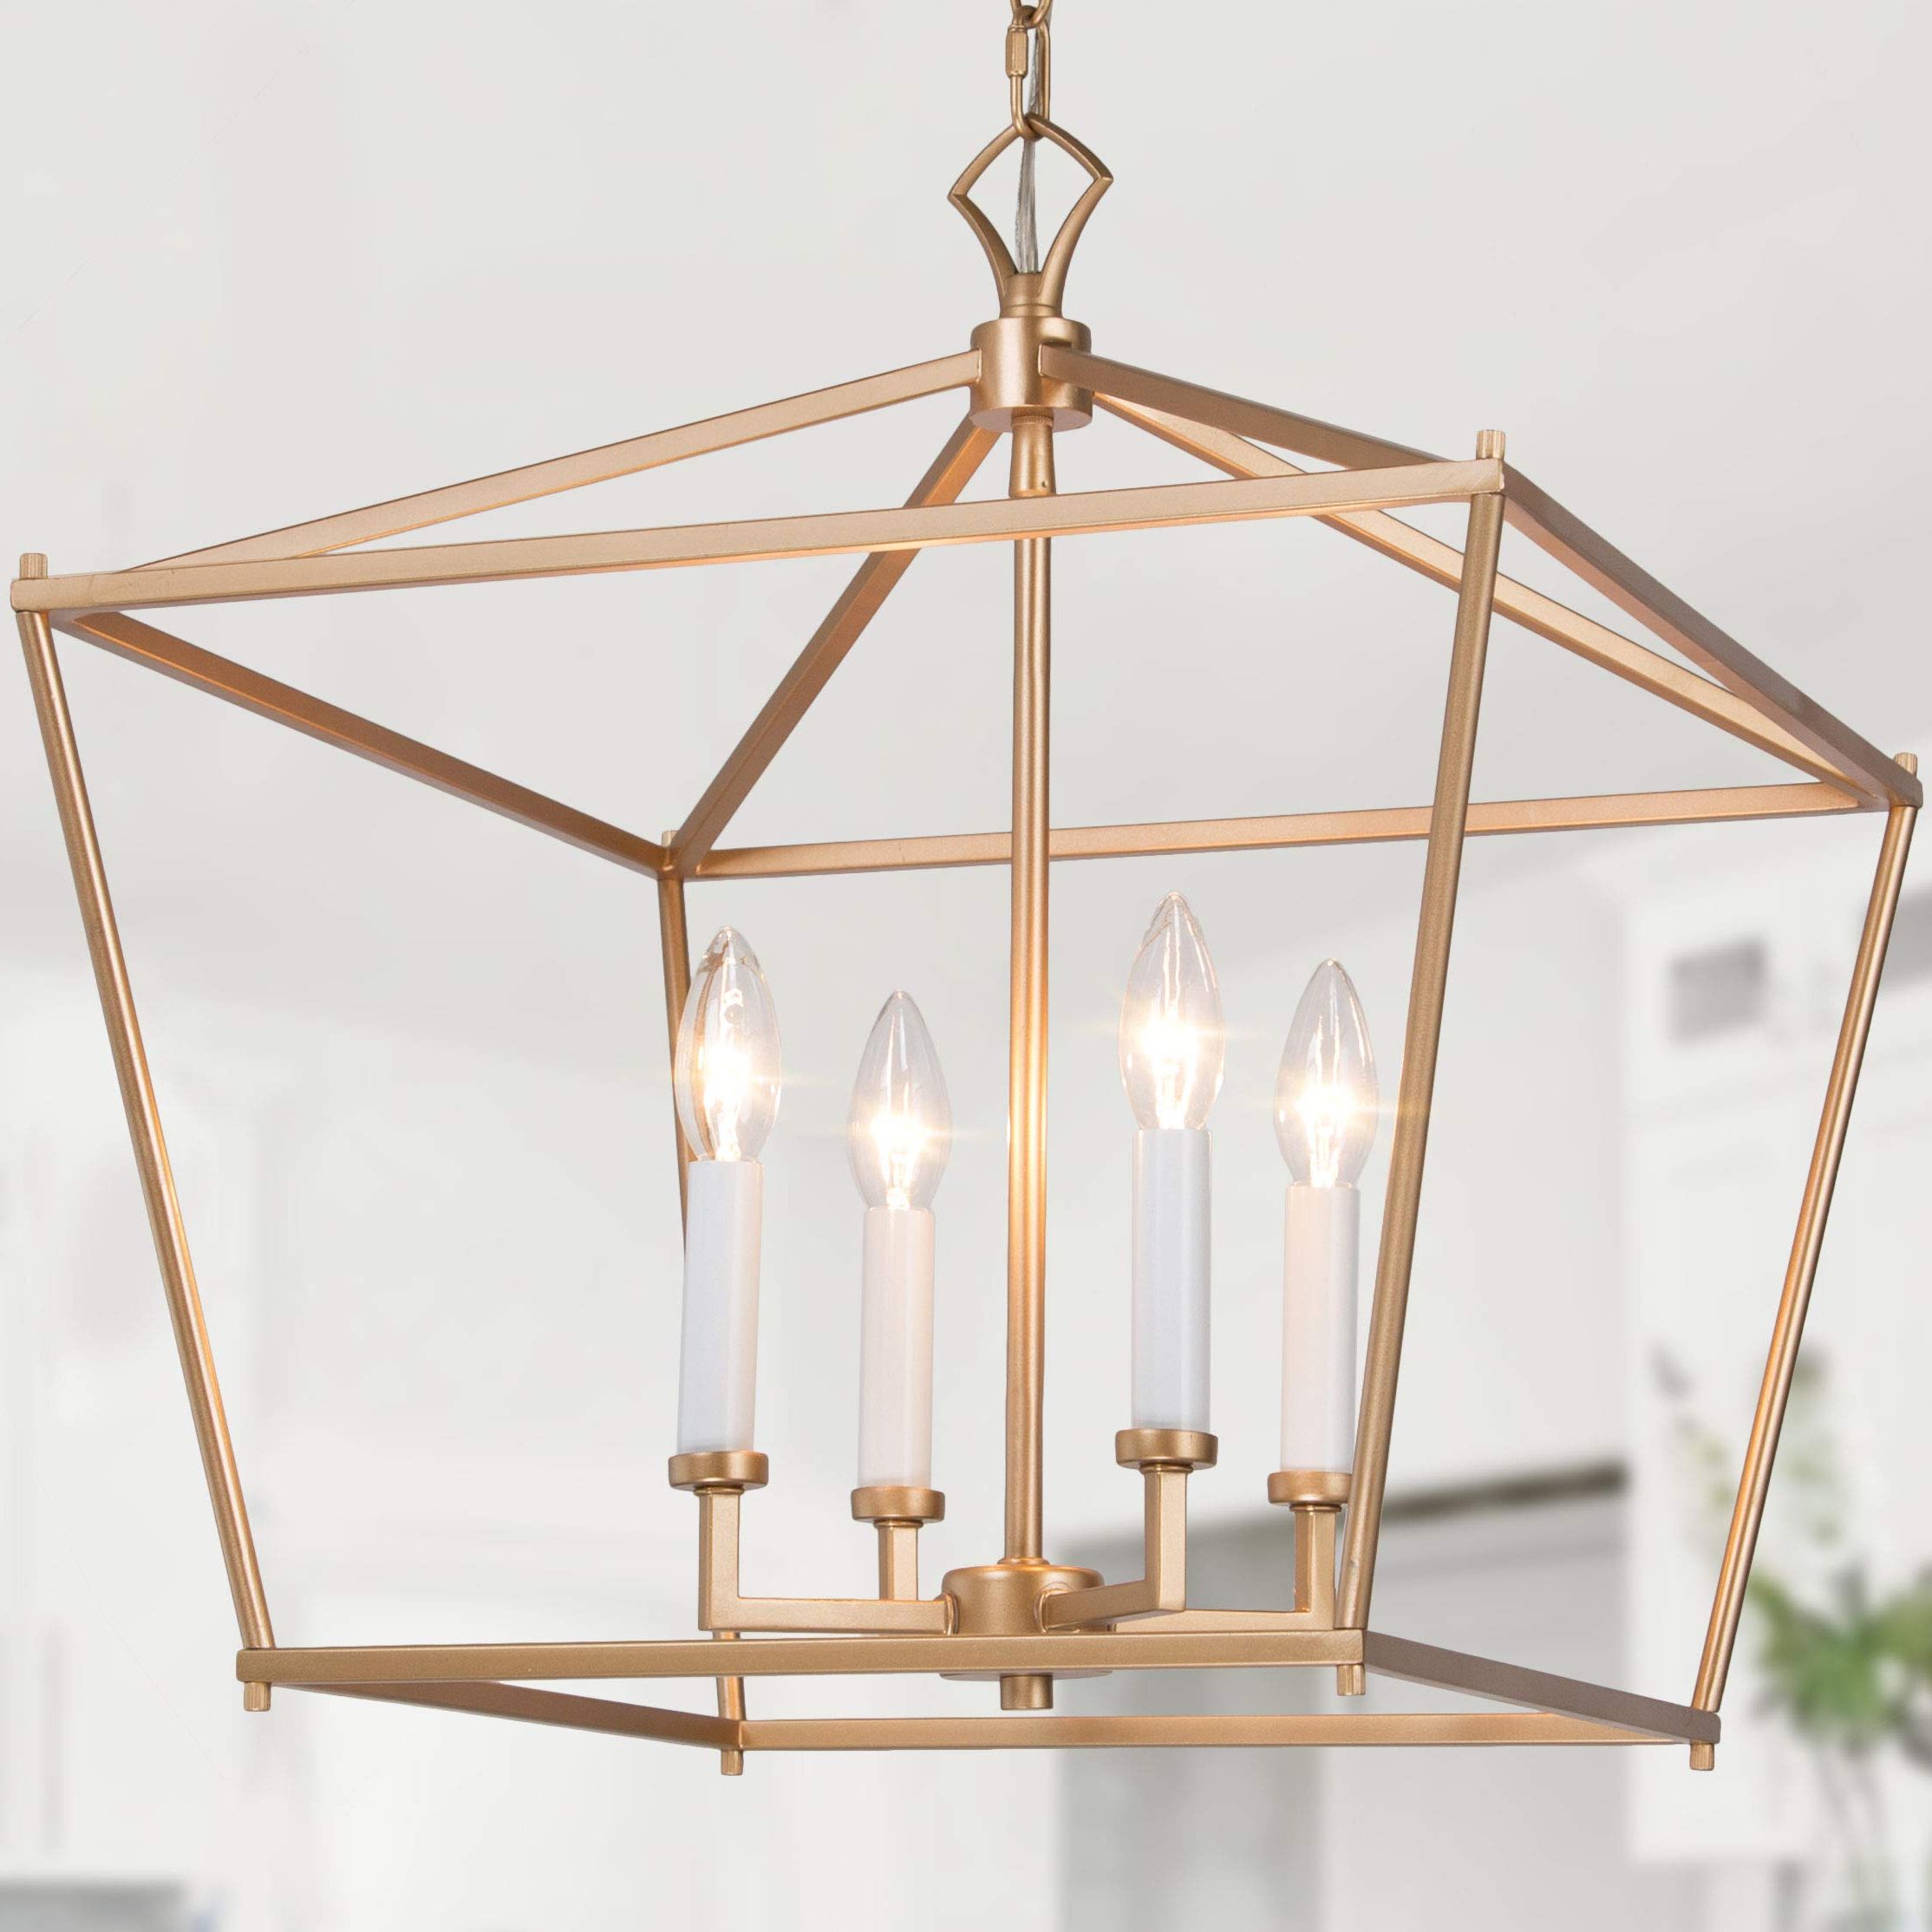 White Gold Lantern Chandeliers Throughout Well Known Gold Chandelier, Lantern Pendant Light Fixtures, Foyer Chandelier For  Dining Room, Kitchen Island, Entryway, 17.5'' L X  (View 5 of 15)